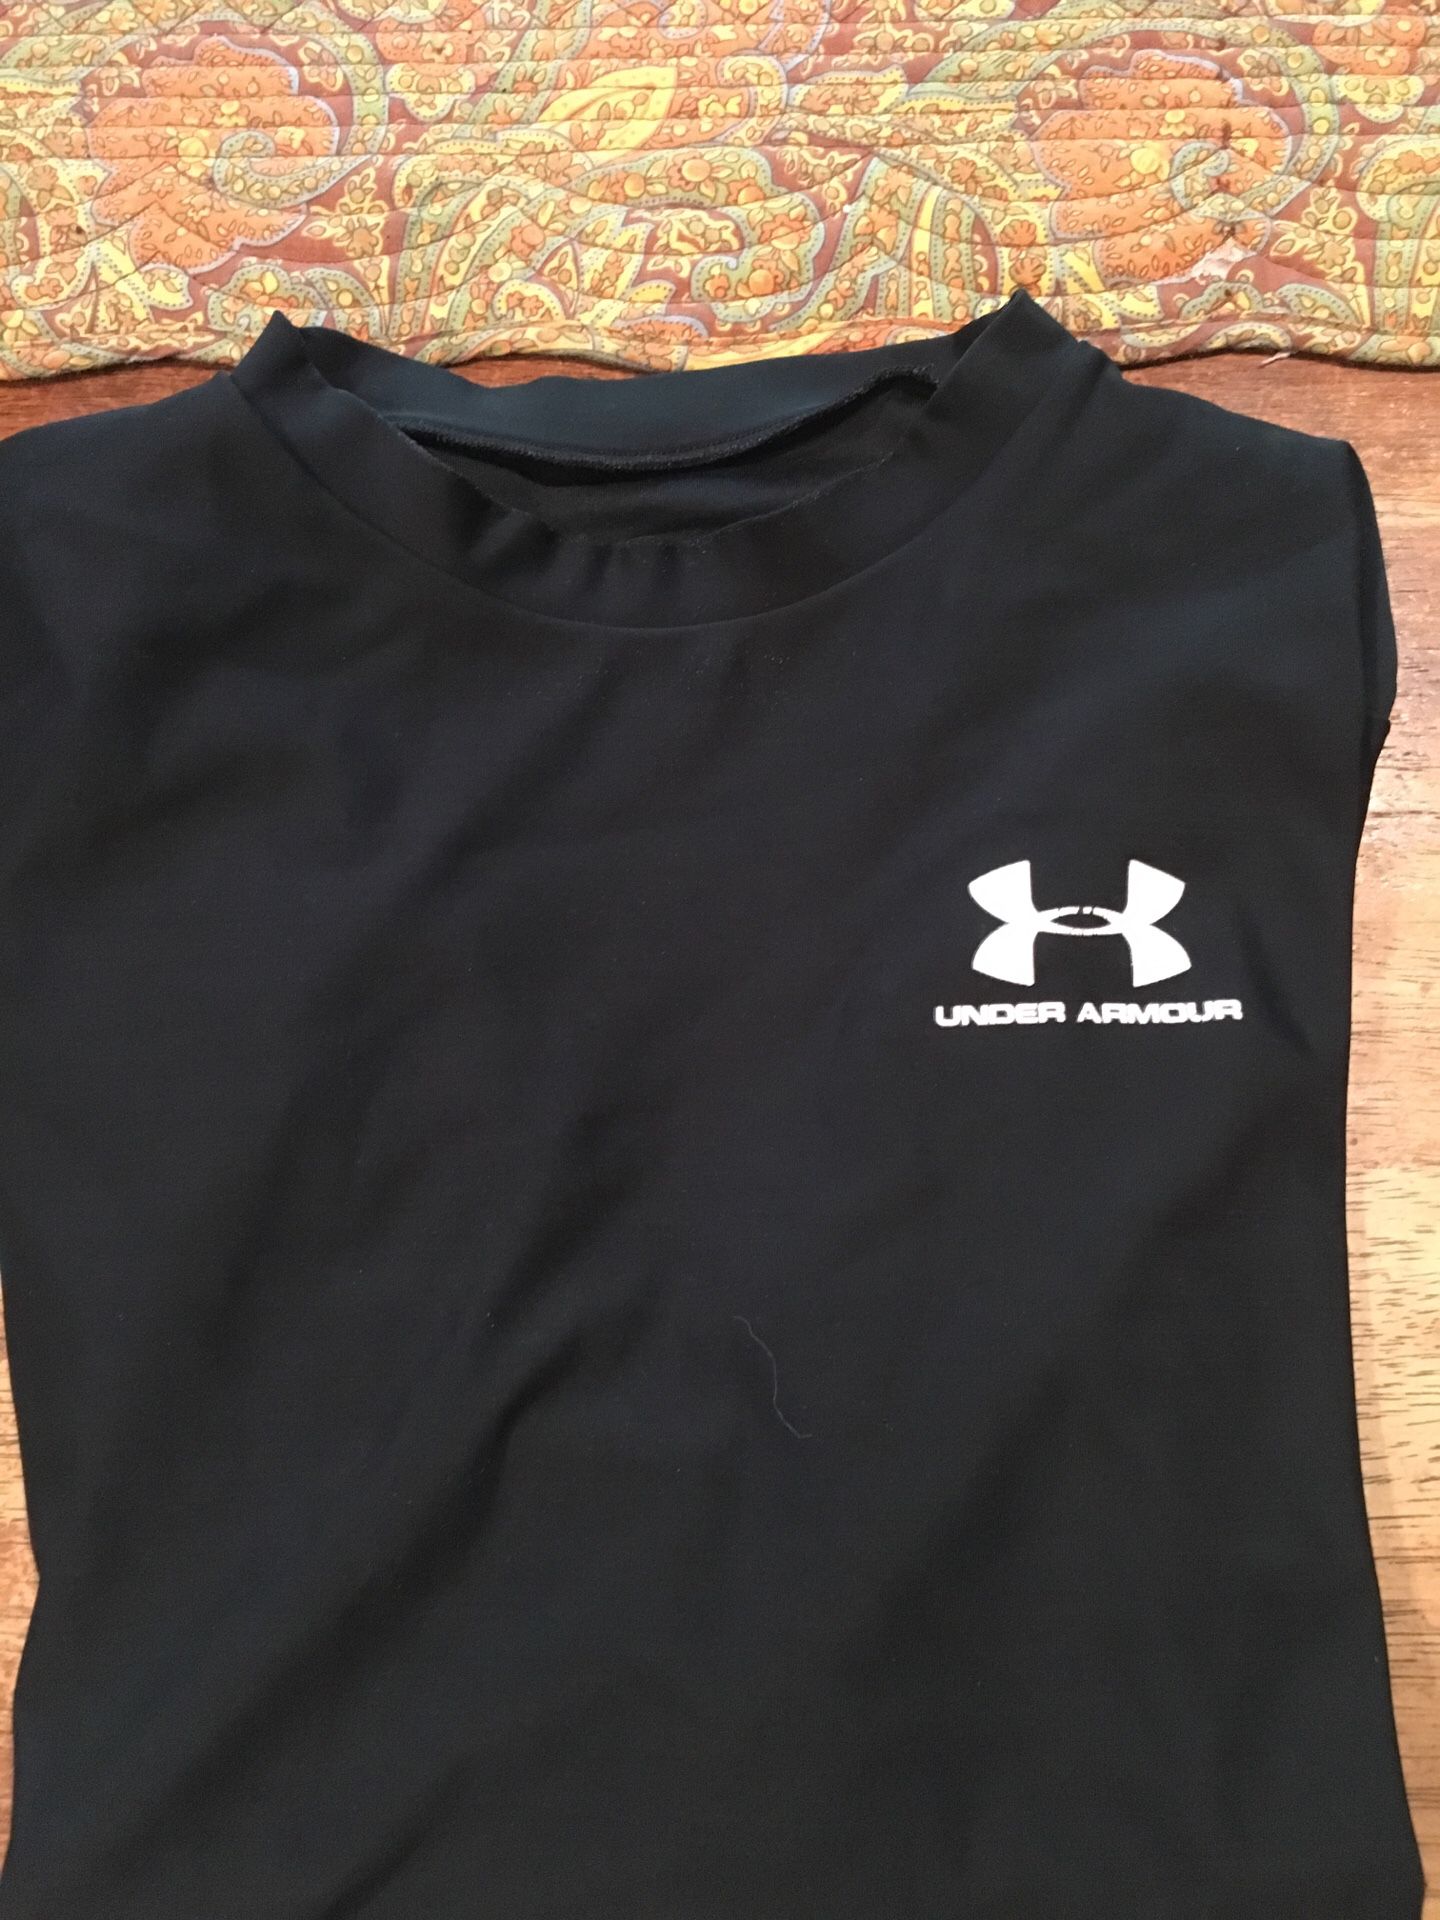 Underarmour black youth small